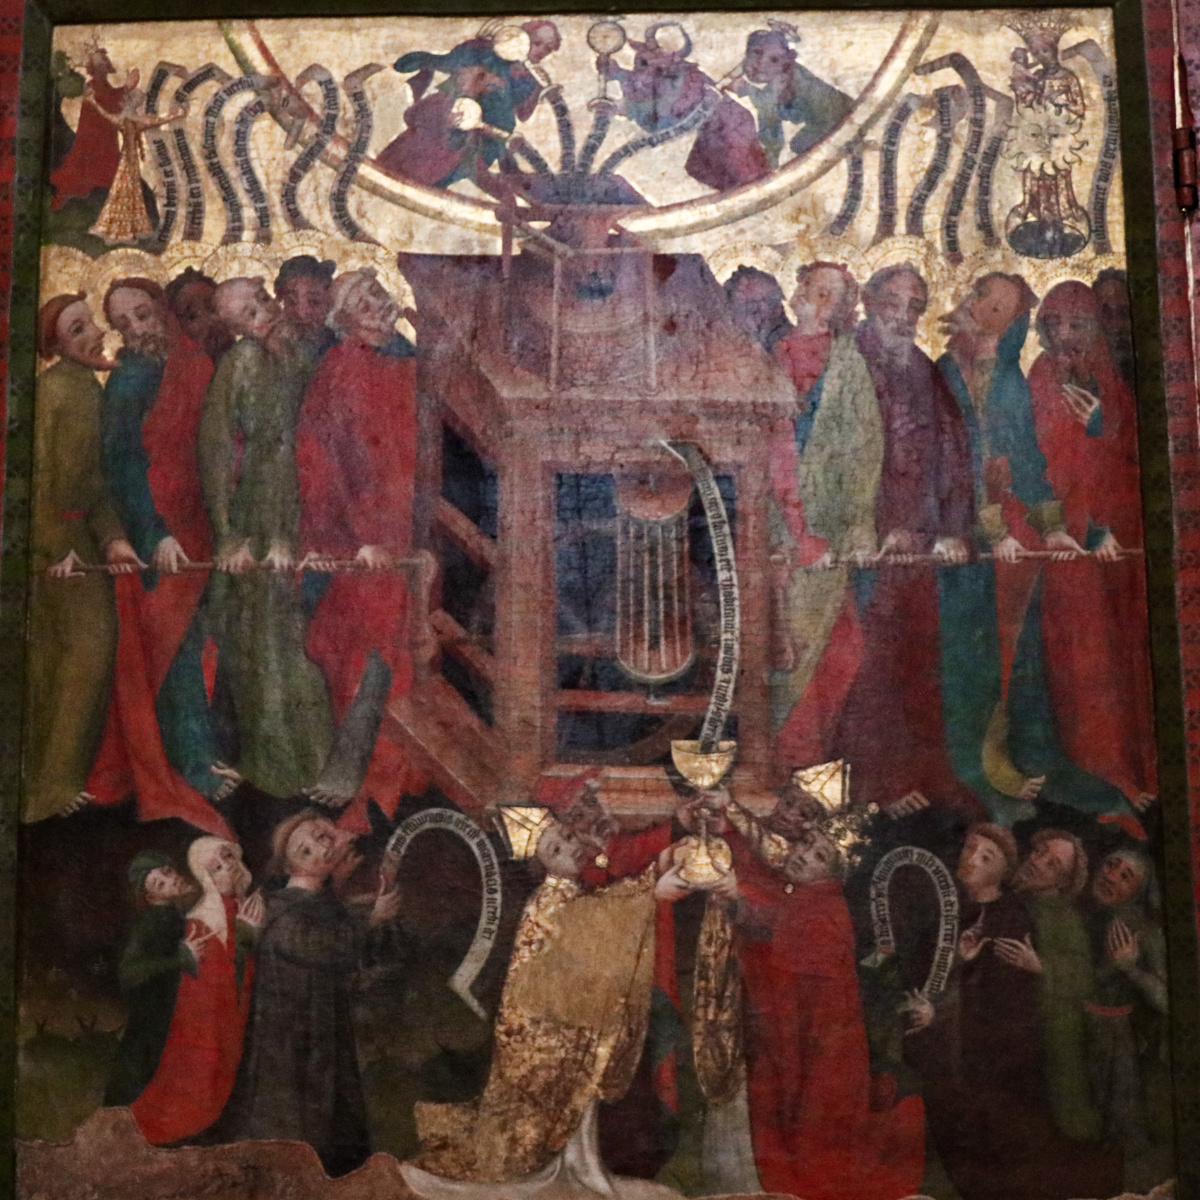 The painted Mühlen Altar (Mill Altar) from 1410 in the Bad Doberaner Münster.